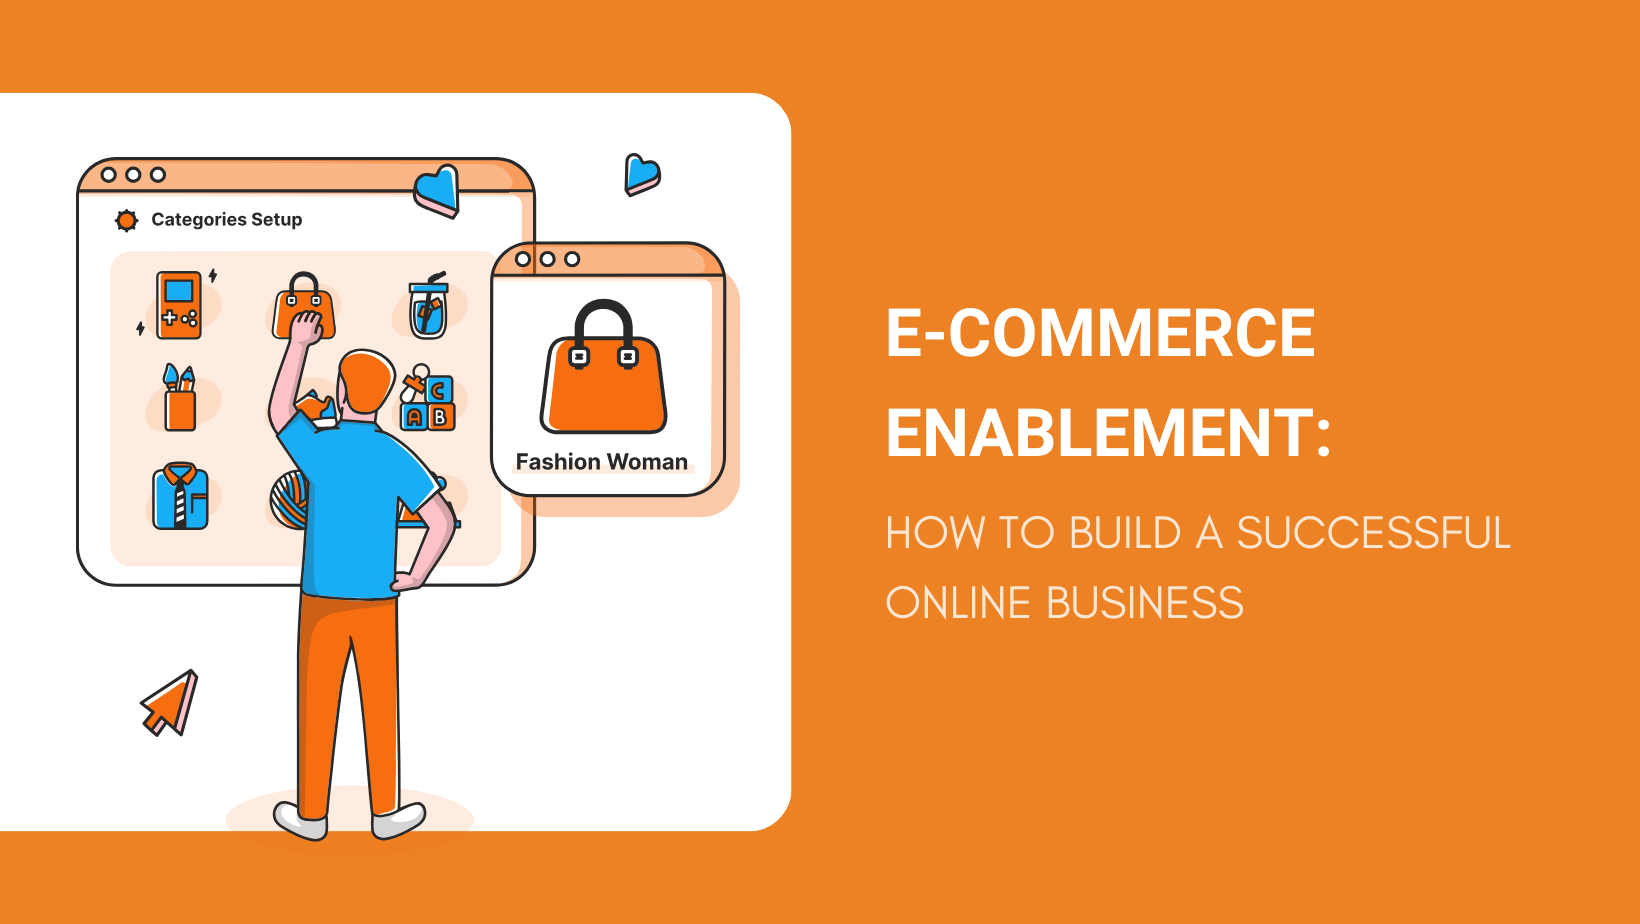 E-COMMERCE ENABLEMENT HOW TO BUILD A SUCCESSFUL ONLINE BUSINESS